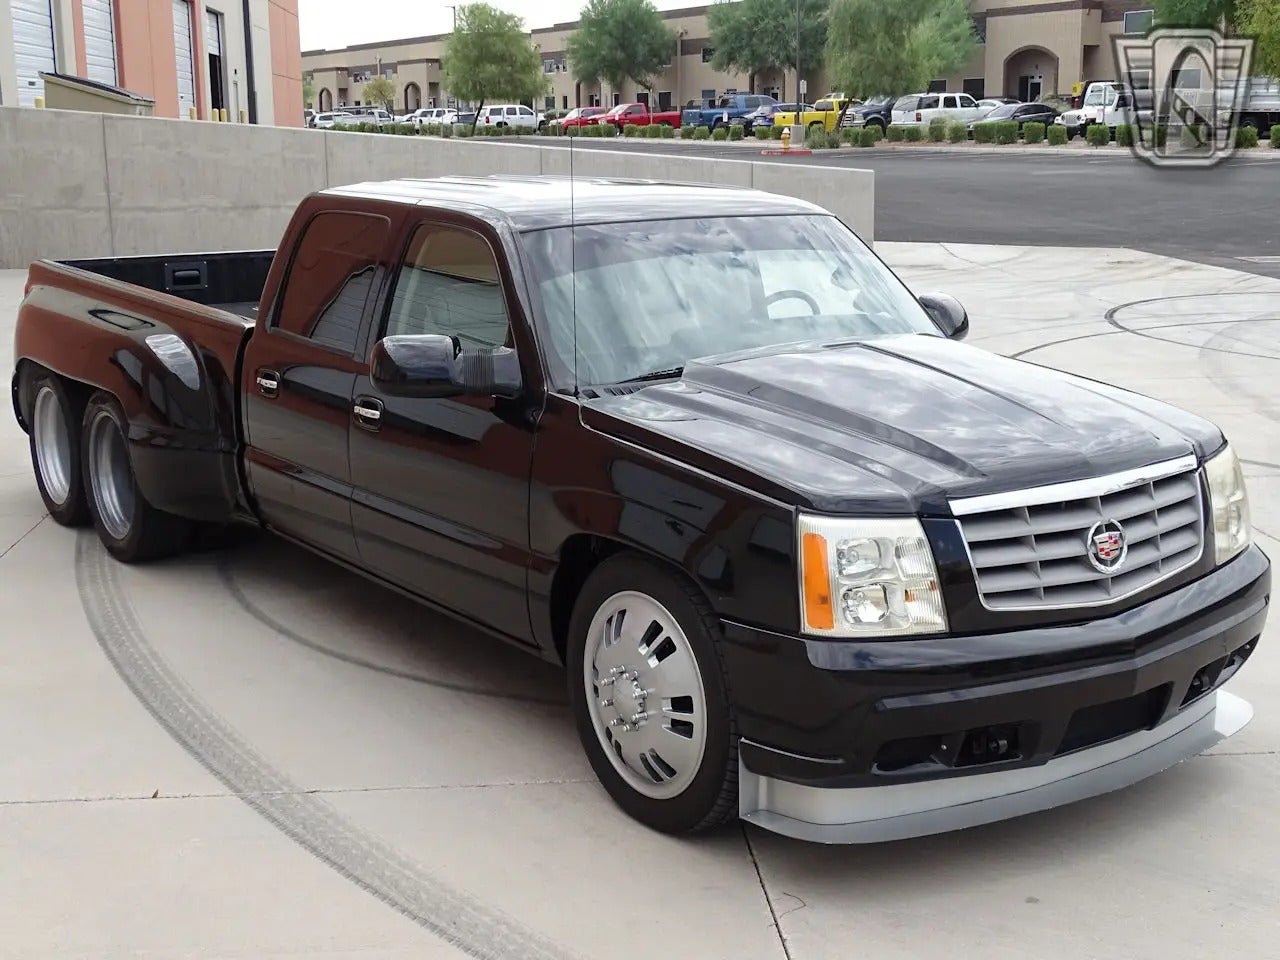 Who could forget the twin-turbo double dually with a Caddy front end swap?